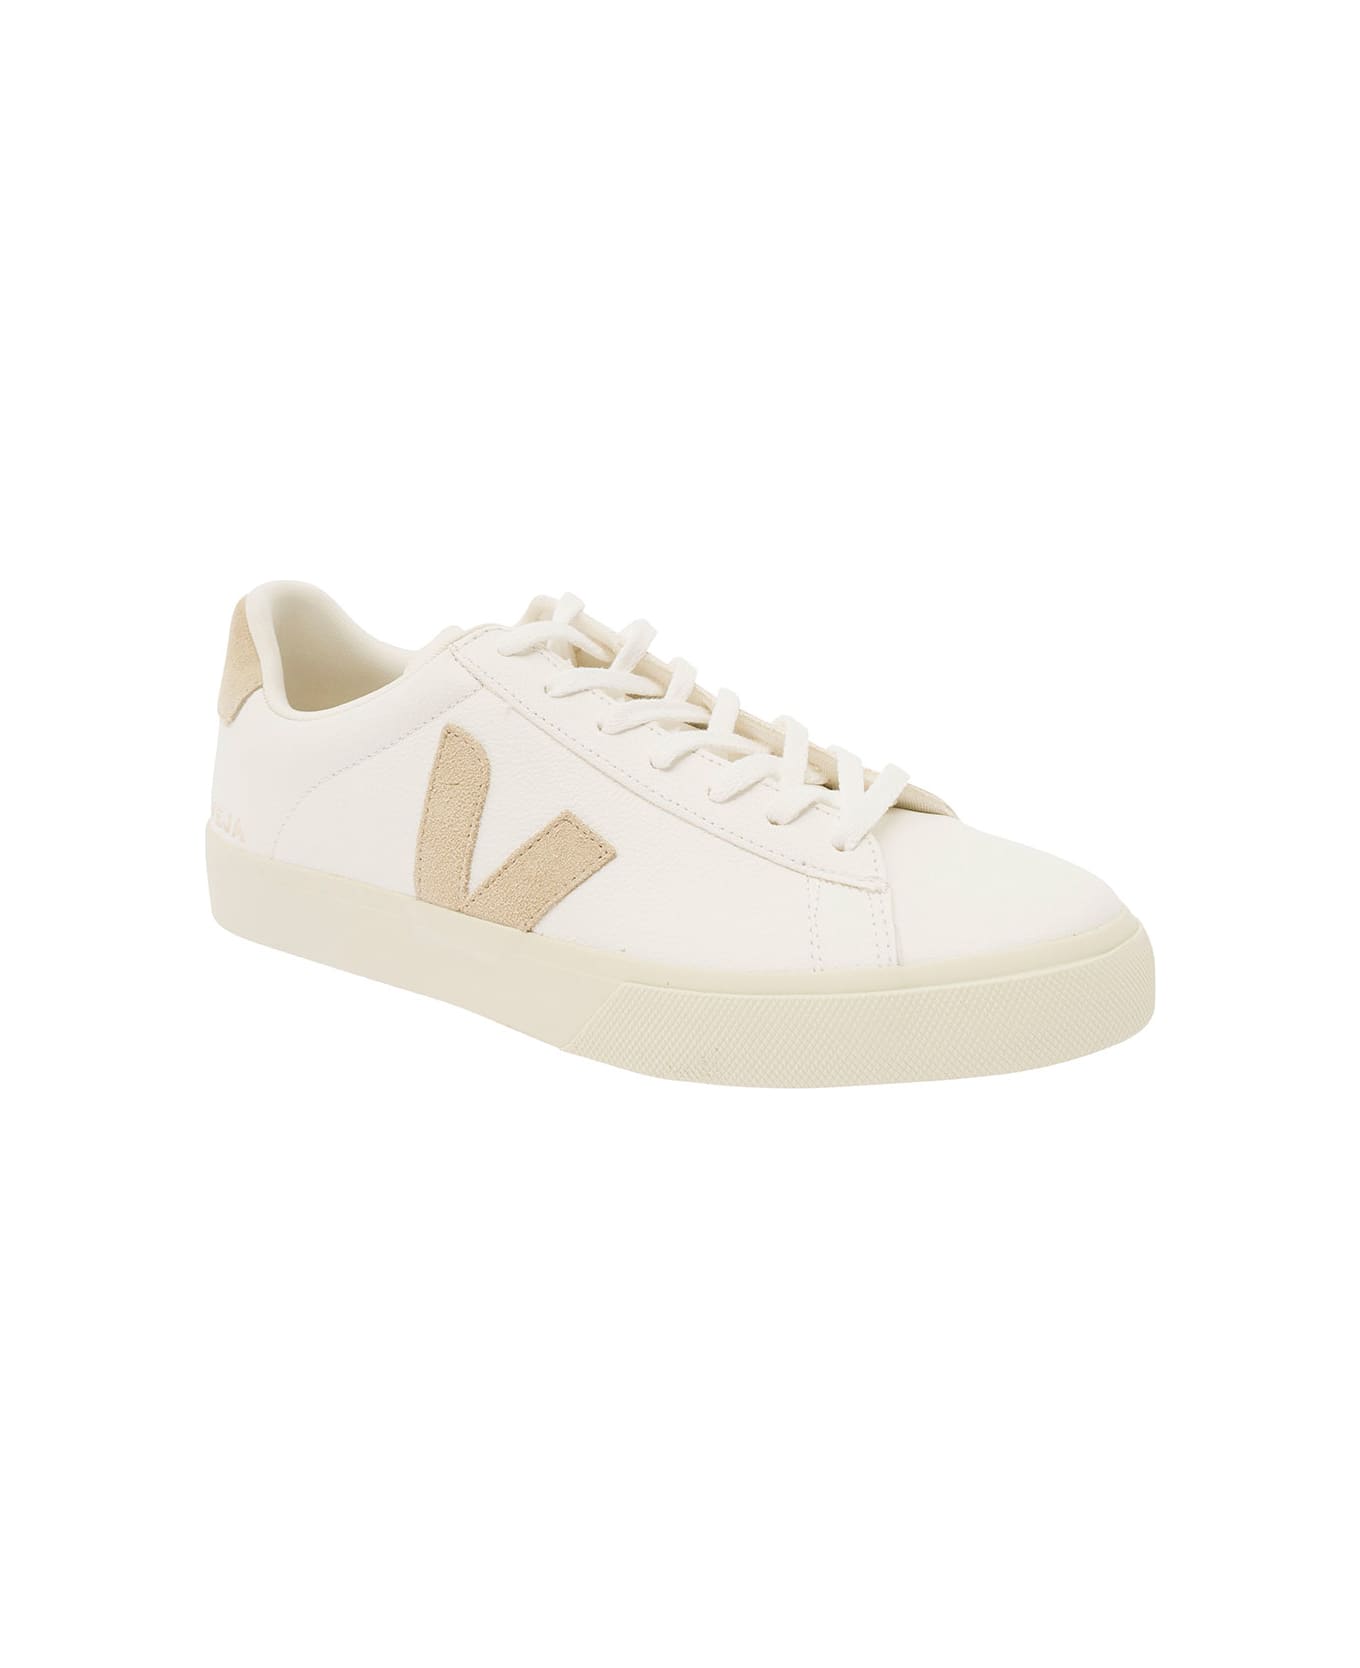 Veja White And Beige Sneakers With Logo Details In Leather Man - White